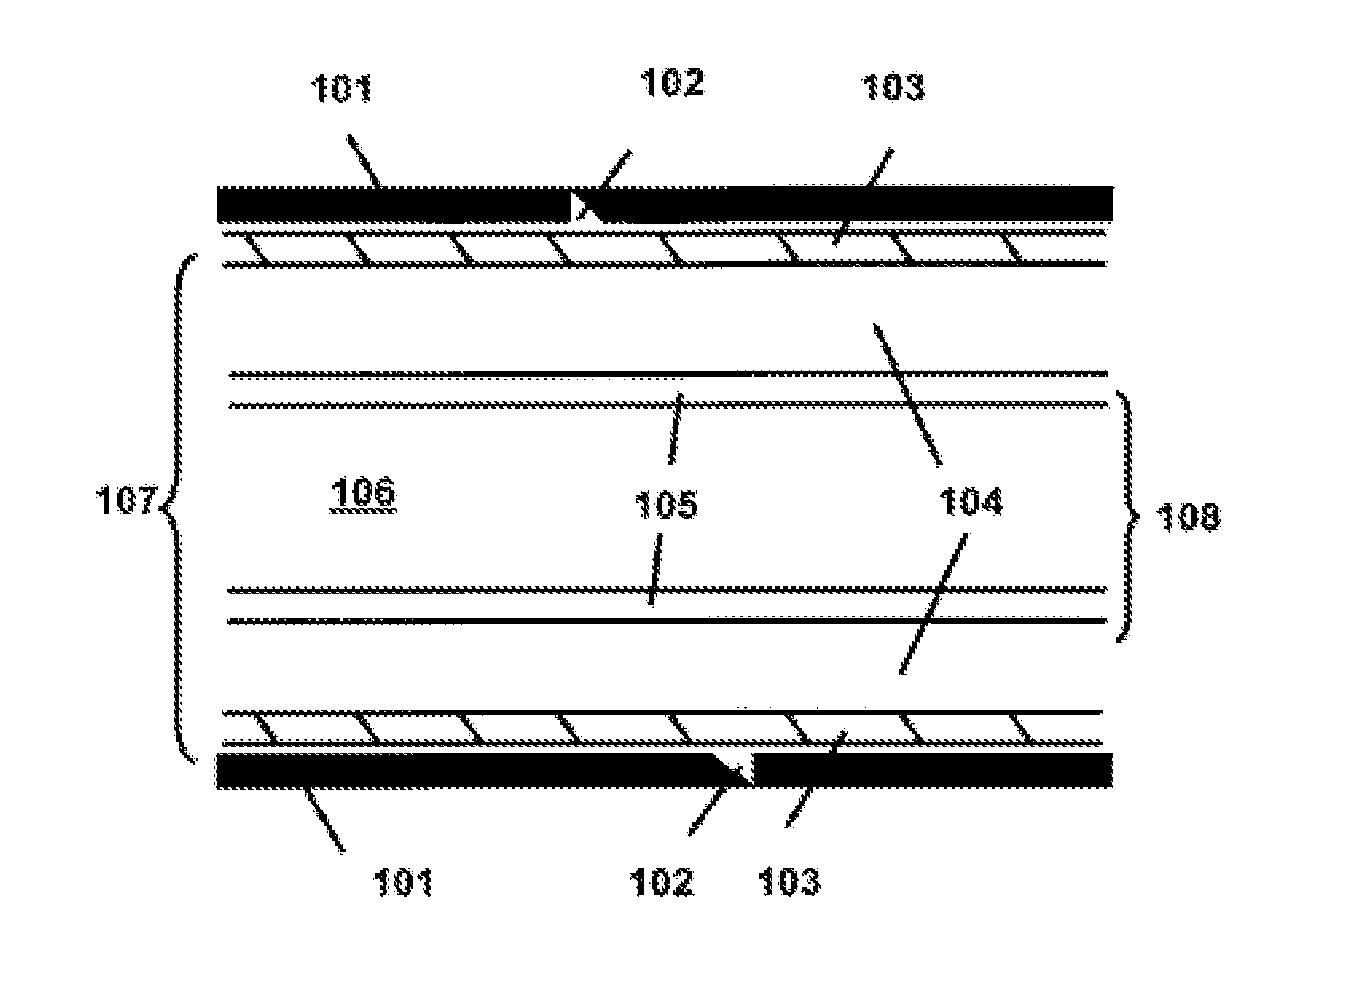 Multi-layer film permeable to UV radiation